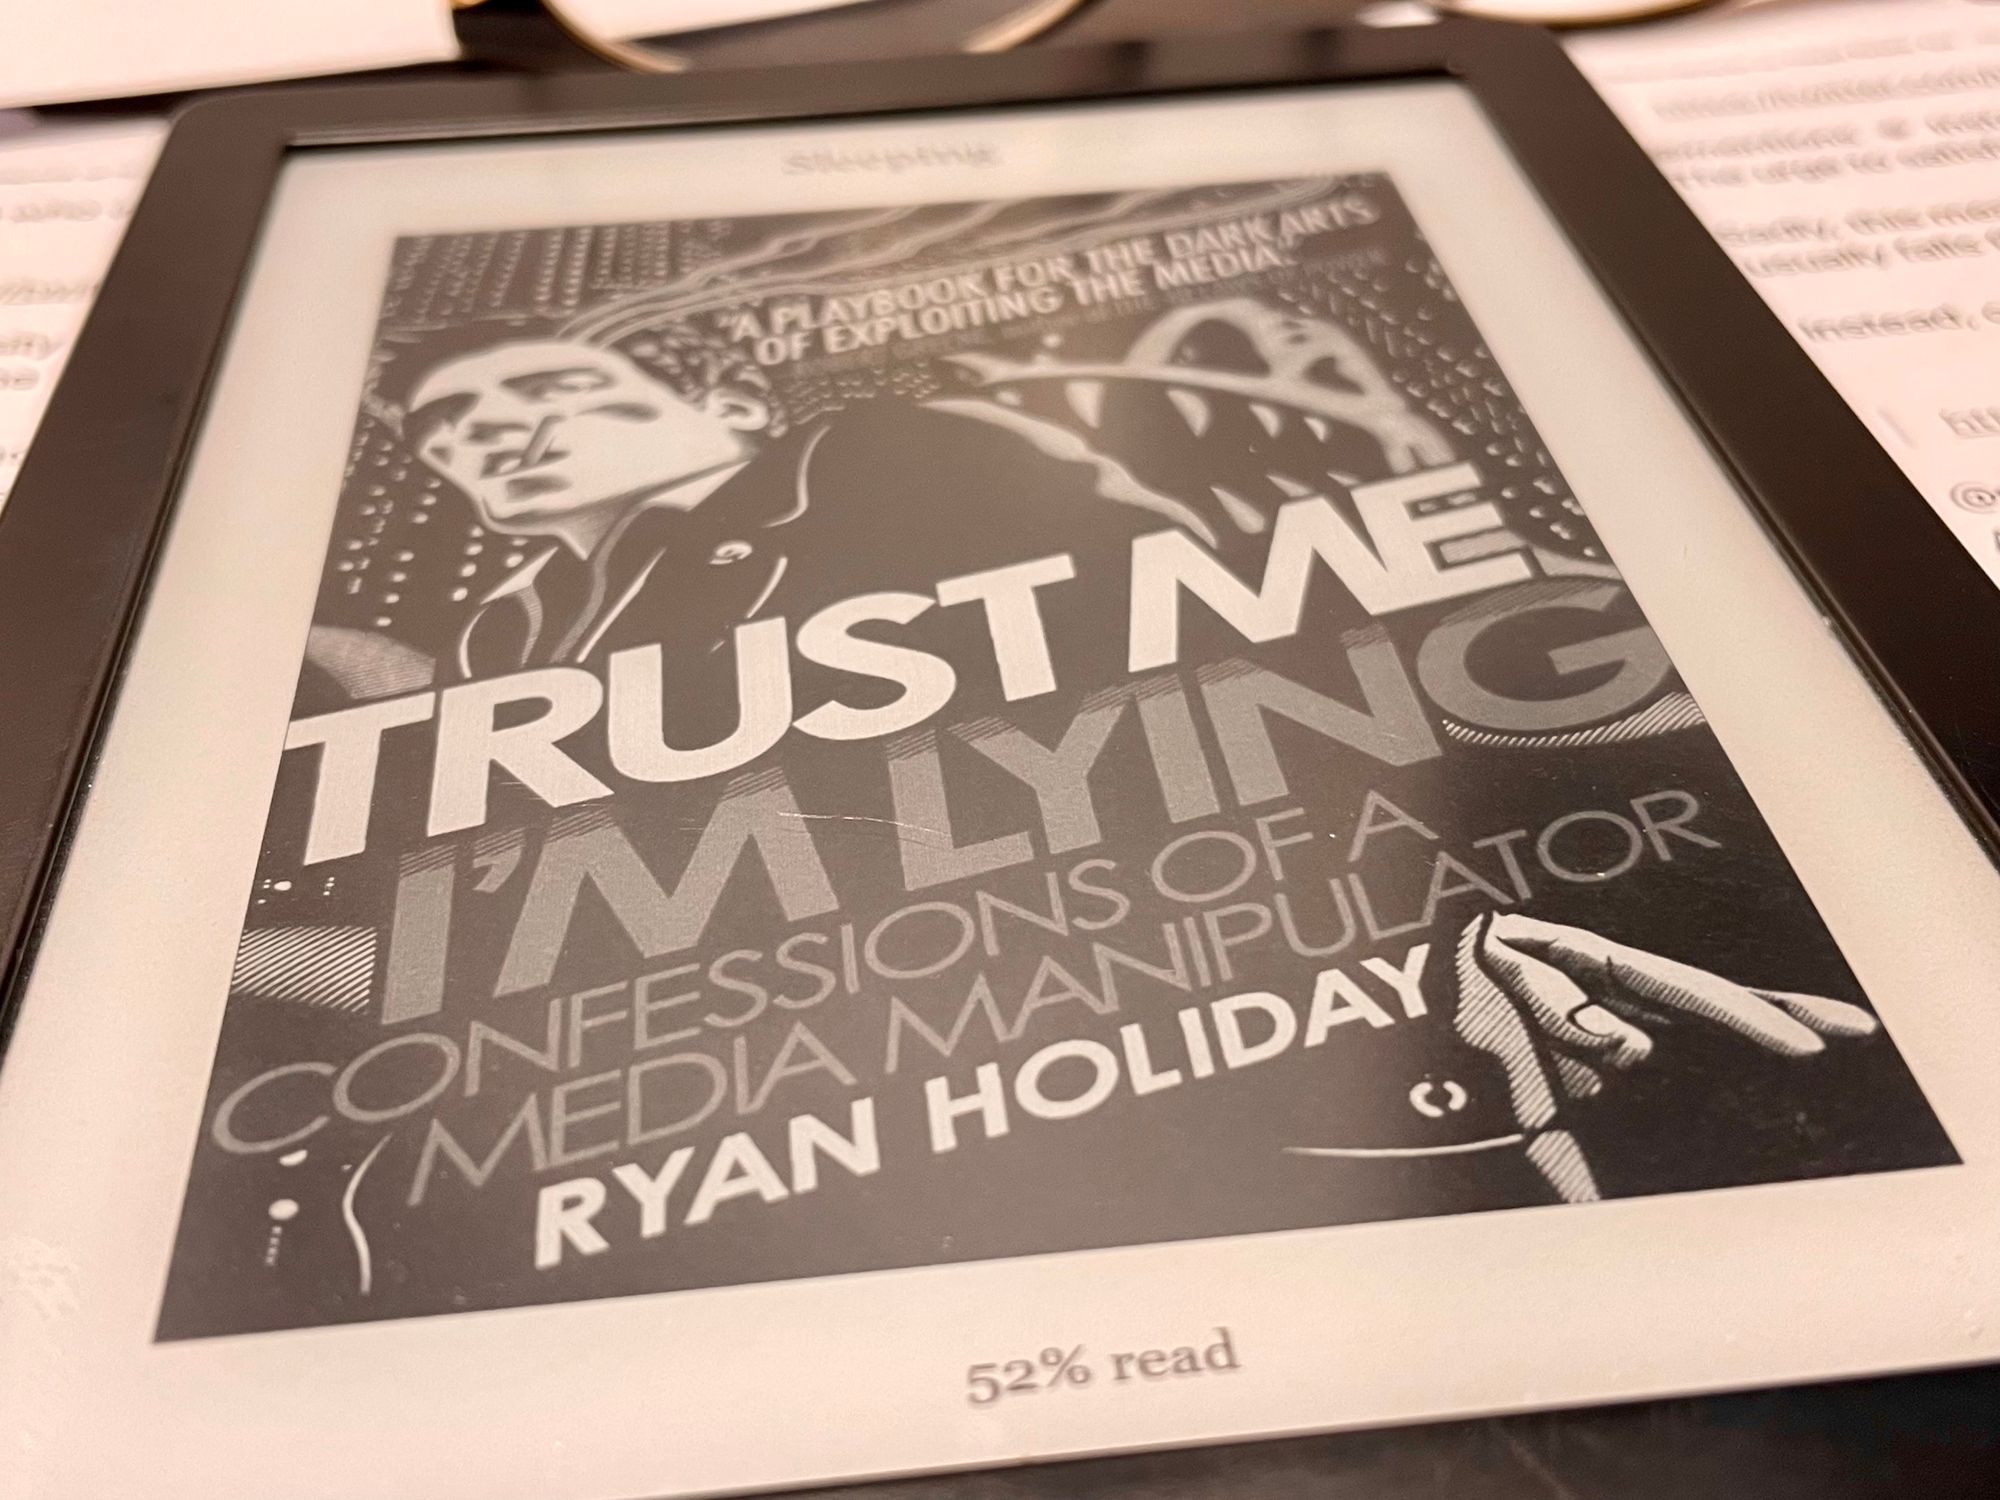 There is also an e-book on Trust me, I'm lying. I enjoyed the book so much, I wanted to have a hard copy as well.